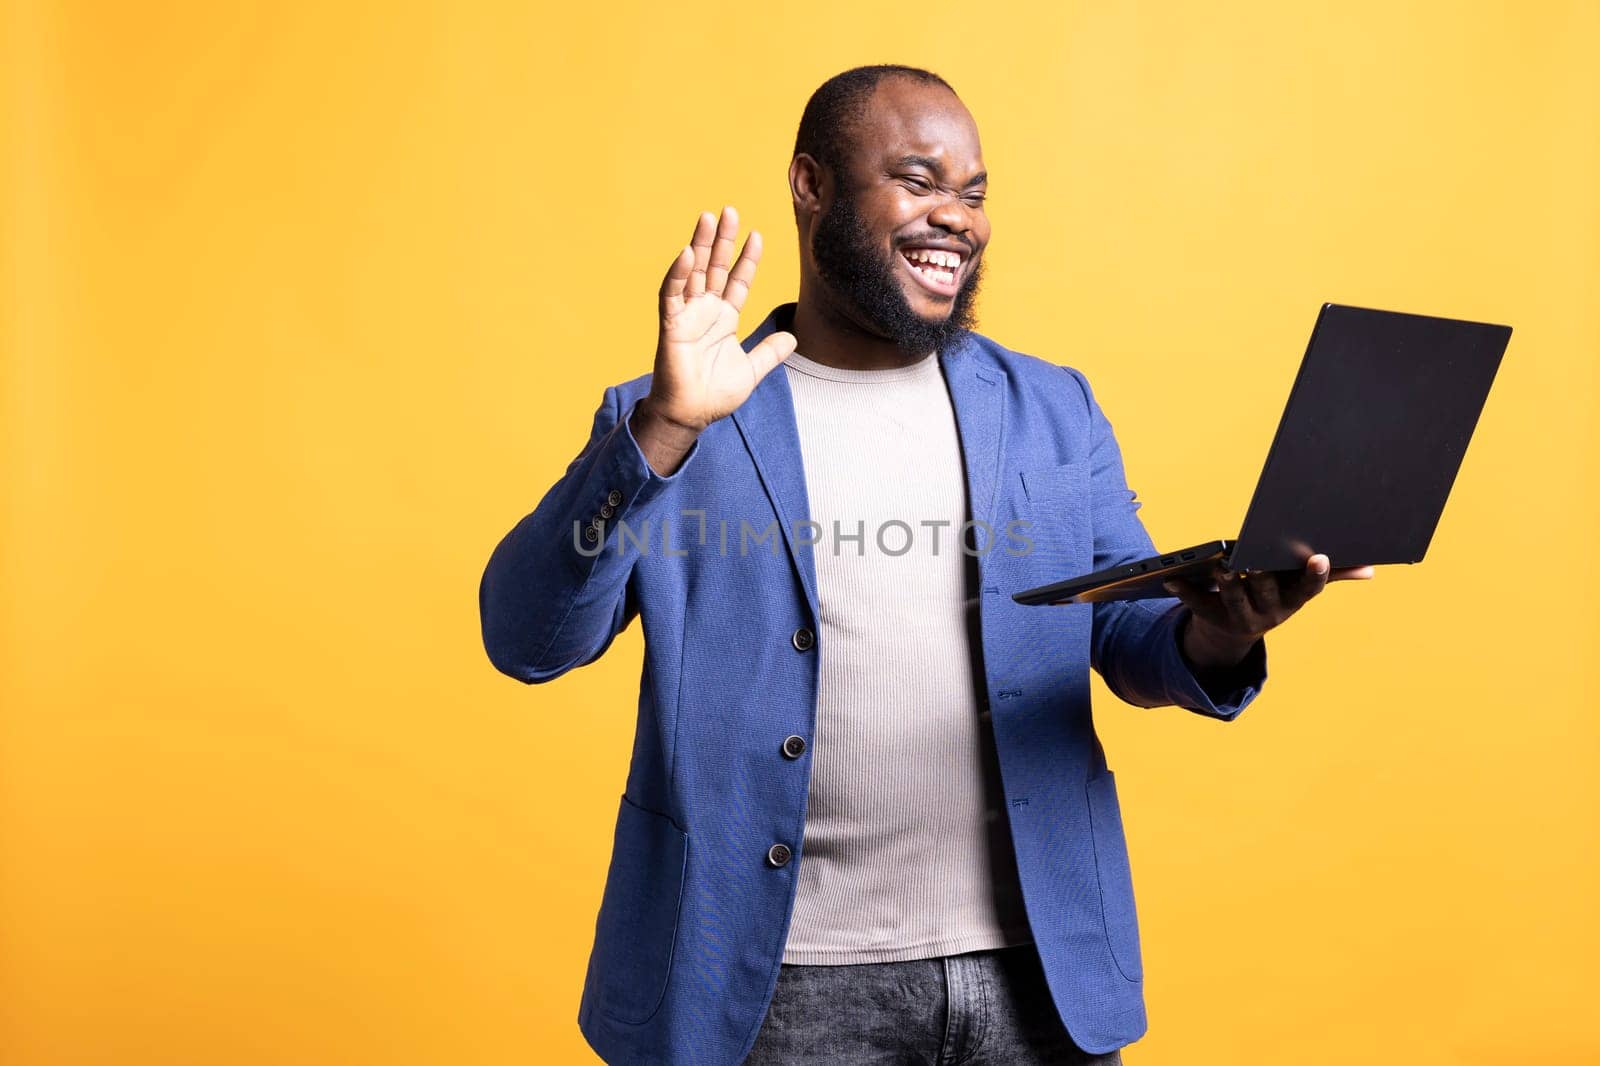 Joyful african american man greeting coworkers during teleconference meeting, isolated over studio background. Happy worker waving hand, saluting colleagues during internet video call